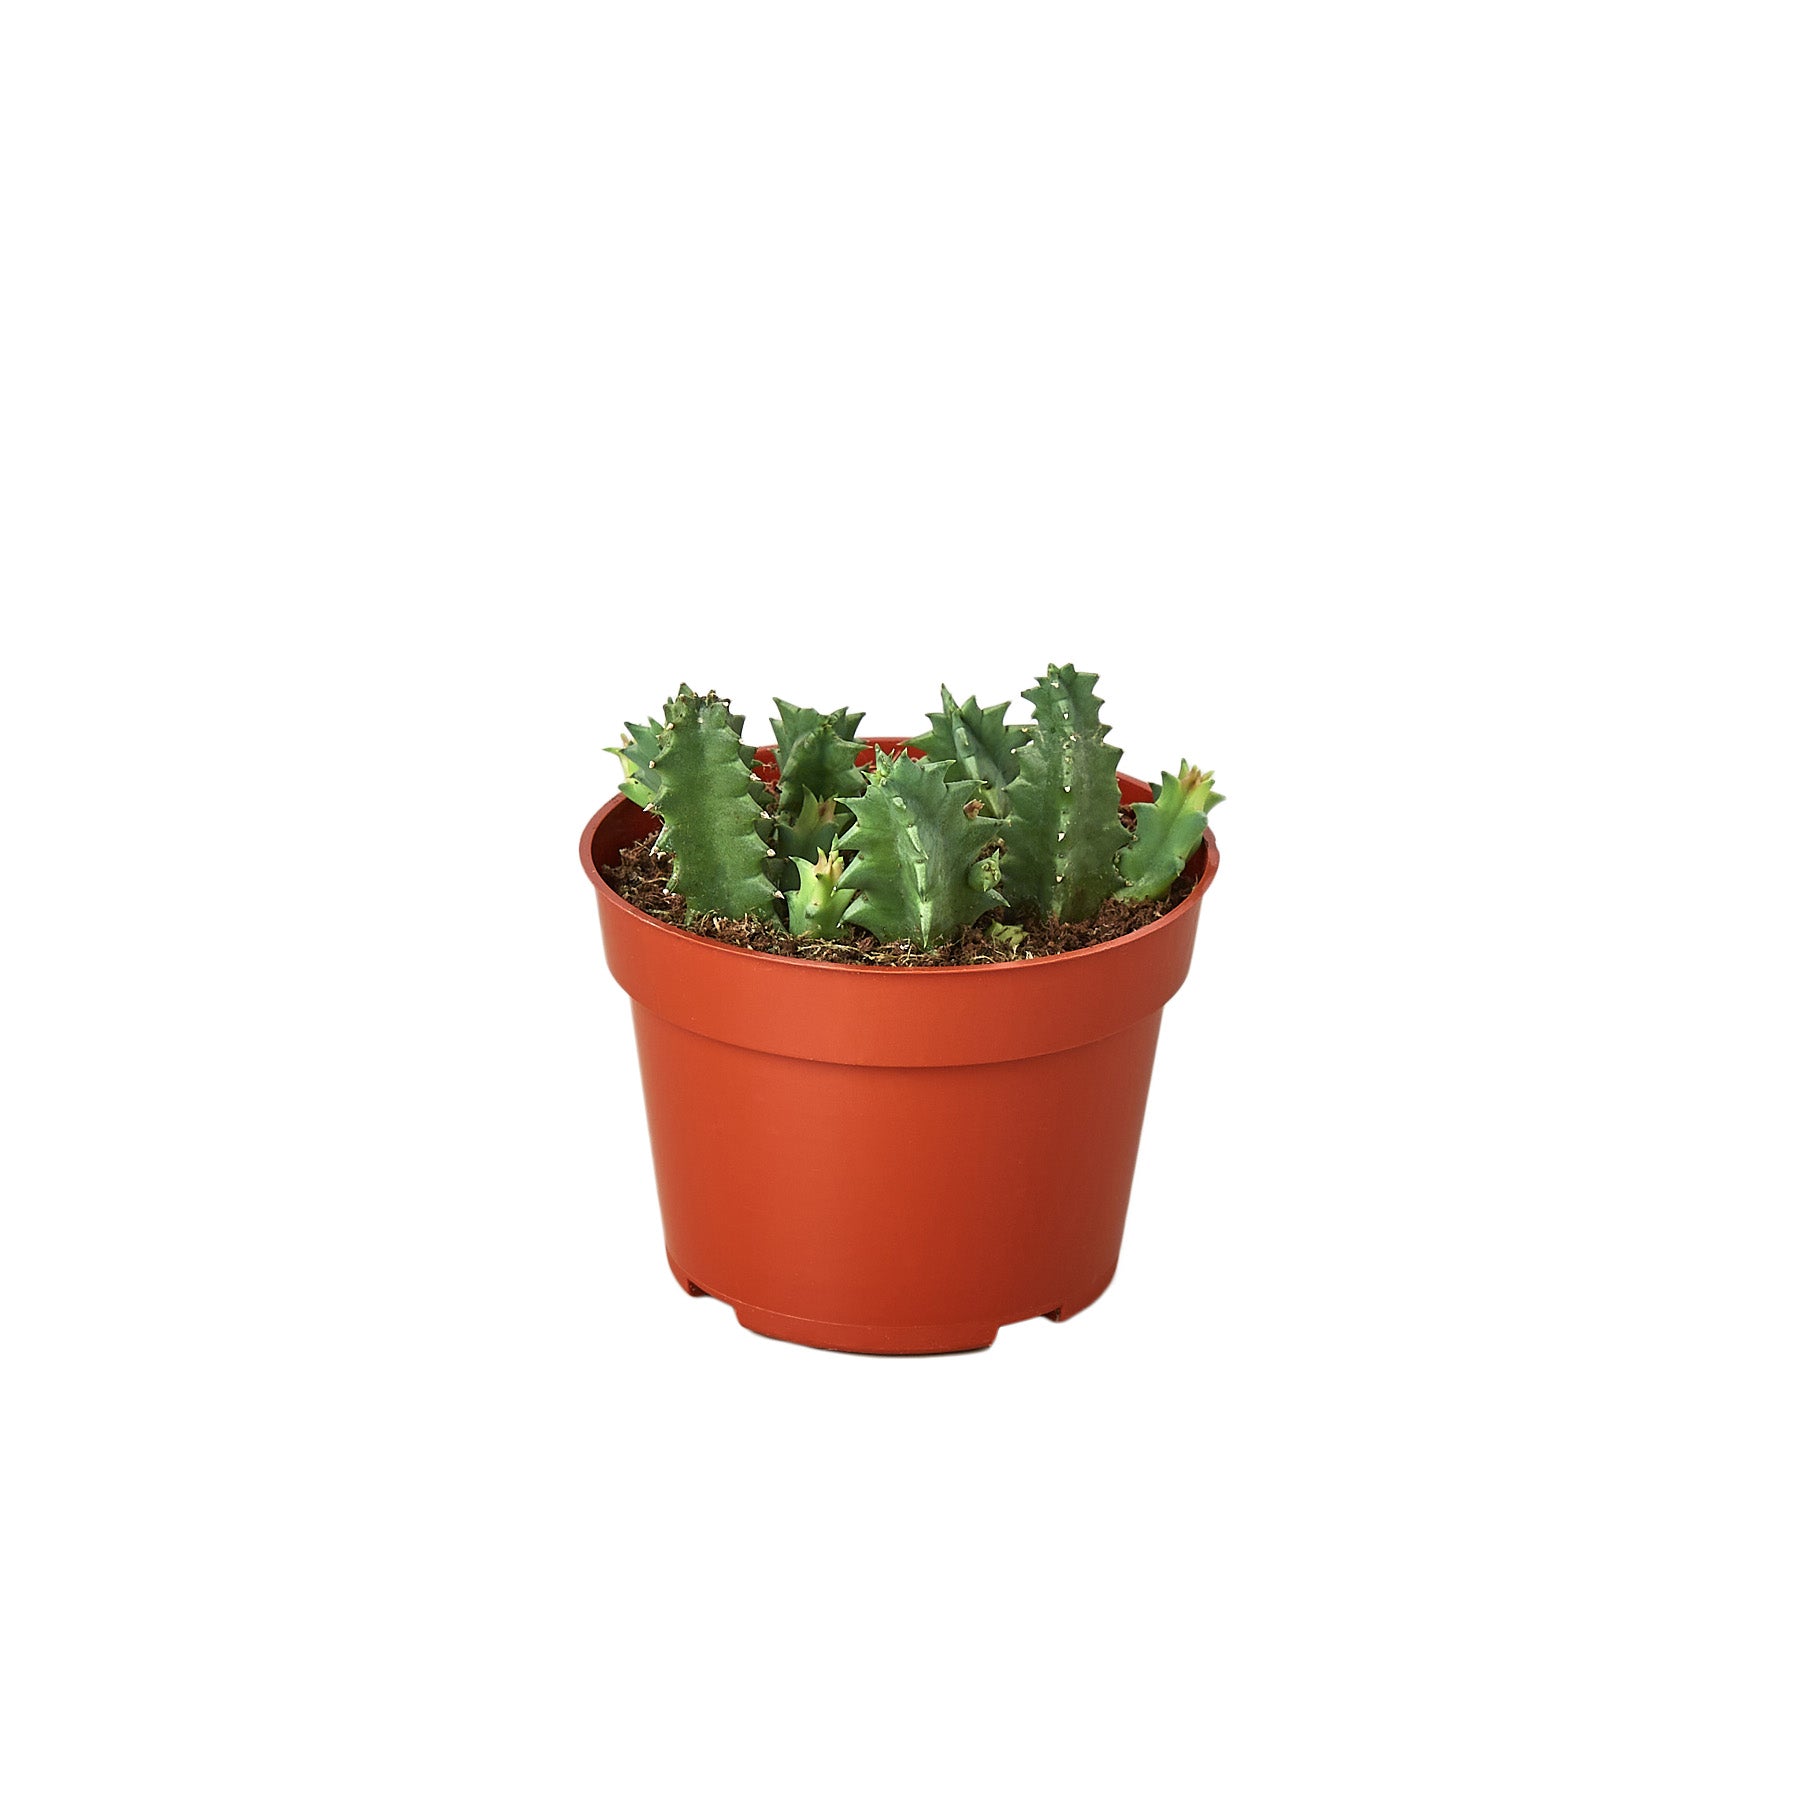 A cactus in a pot on a white background, showcasing the top plant nurseries near me.